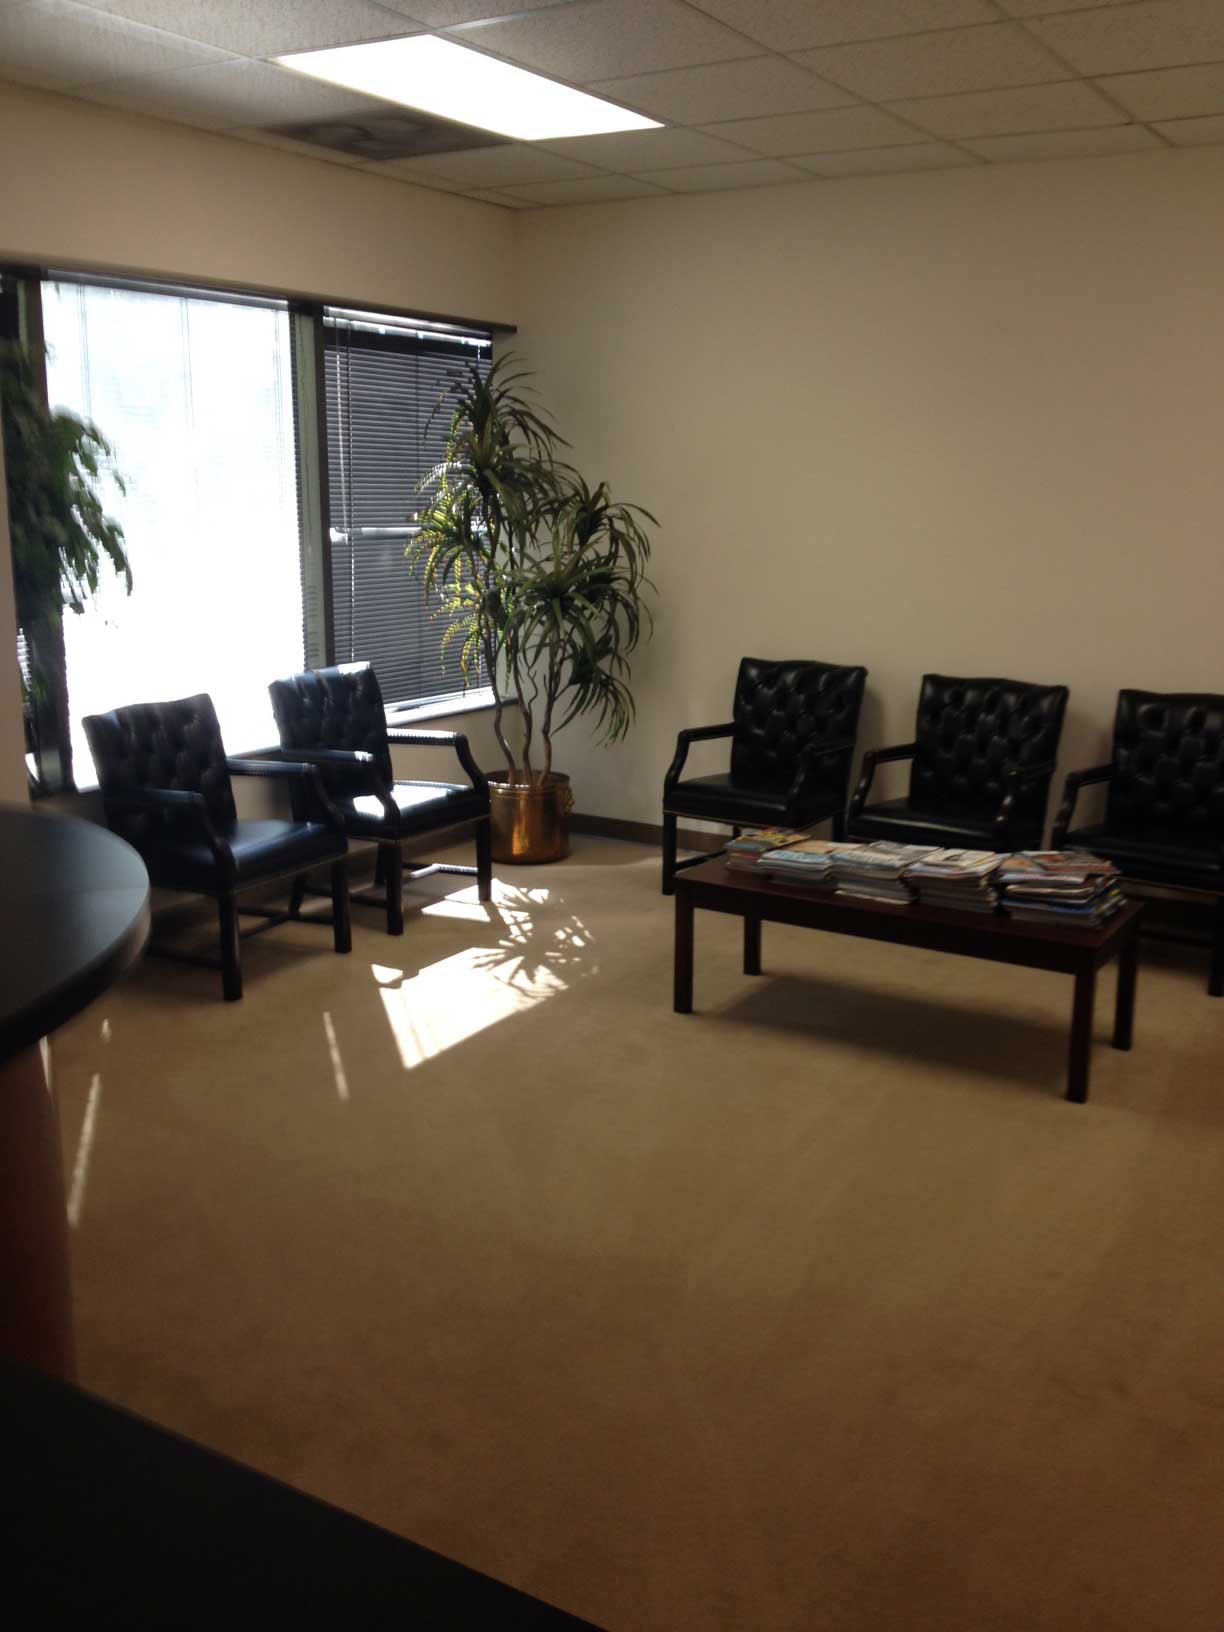 Waiting room at Spencer & Associates' office